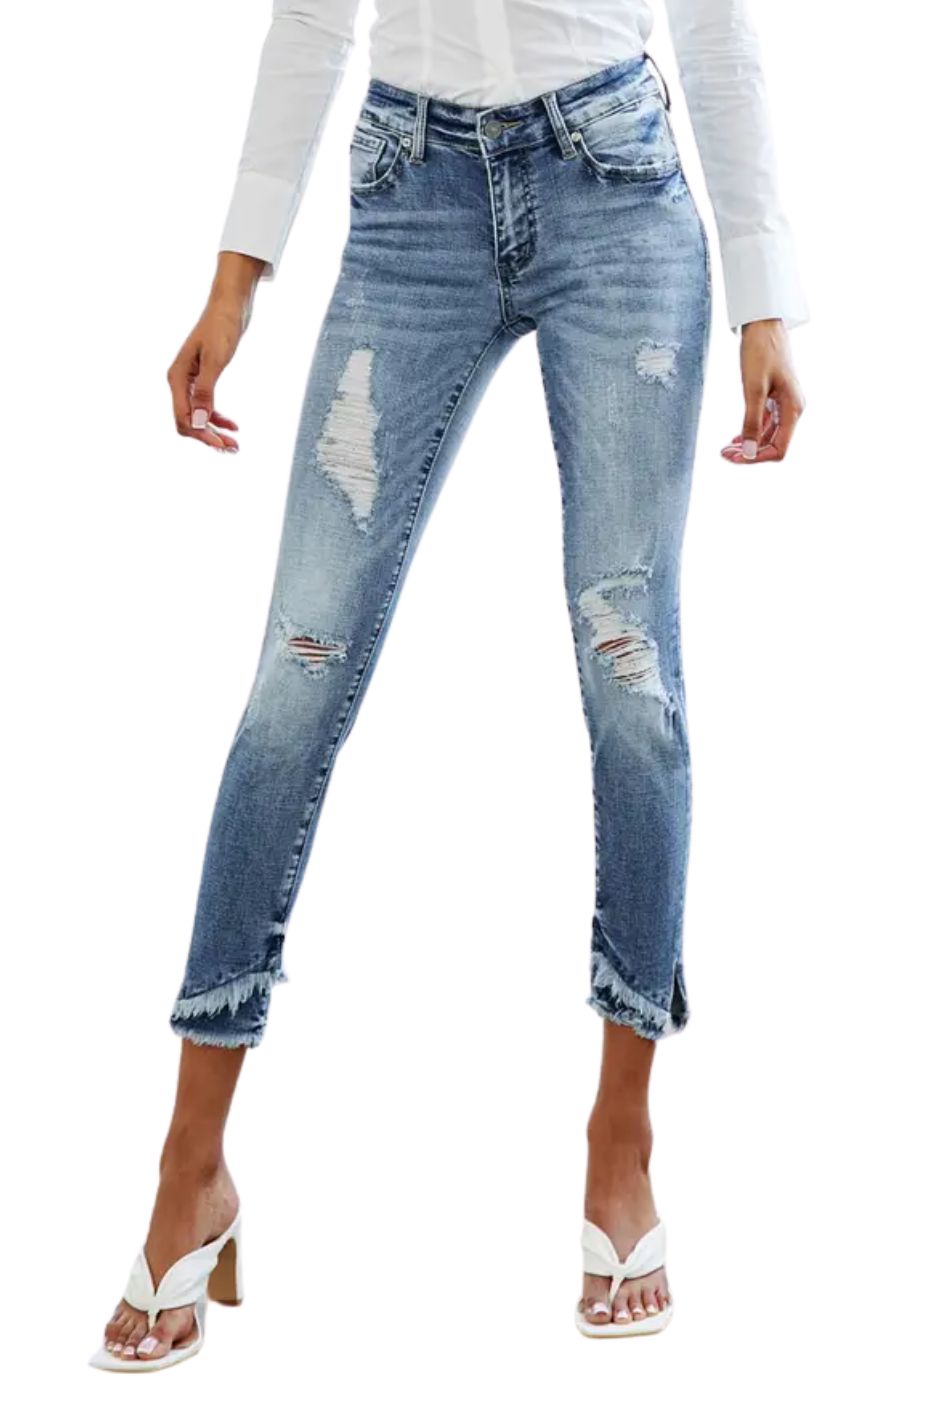 Stone Fray Distressed Skinny Jeans - Expressive Collective CO.